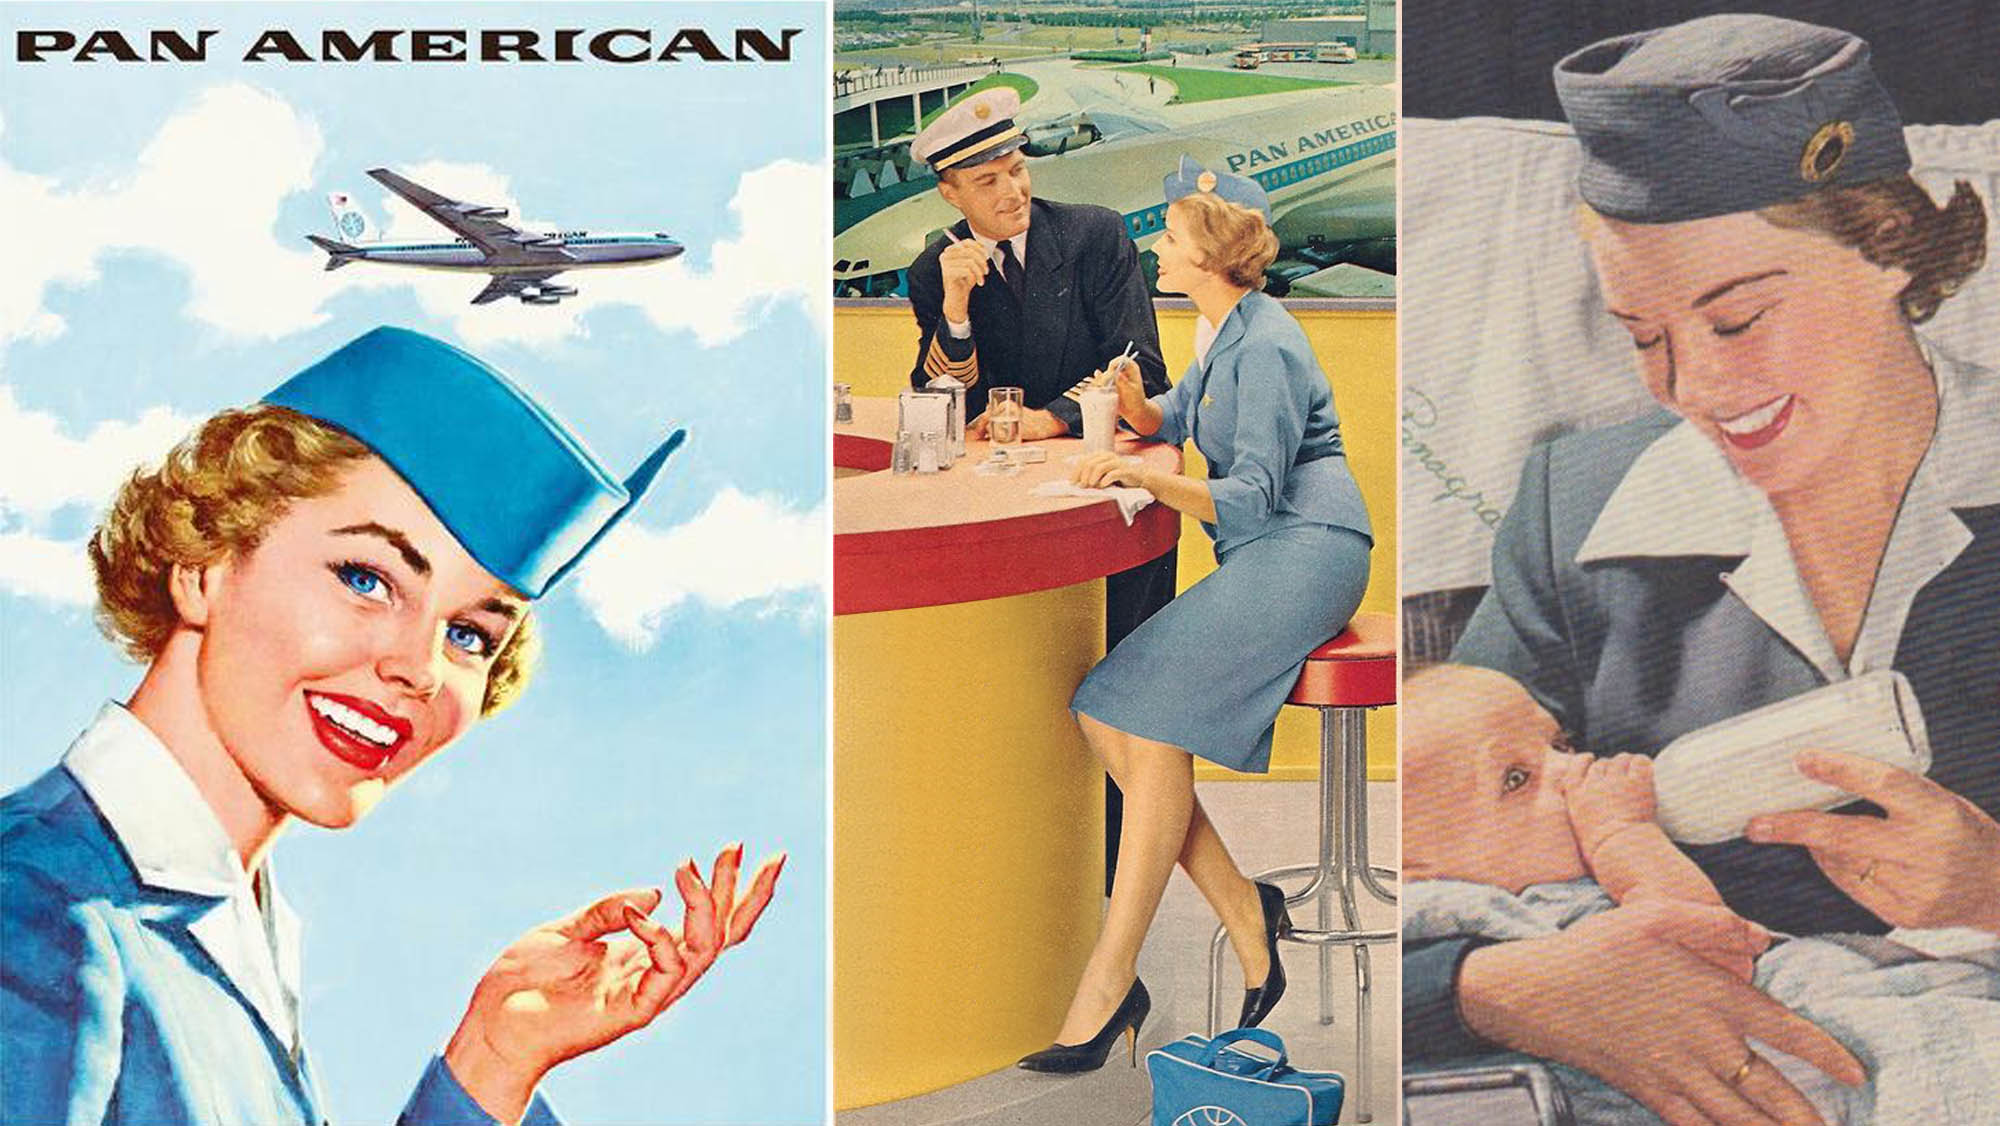 PAN AM retro ads for Joan Seed’s blog post The Making of Cockpit Girl